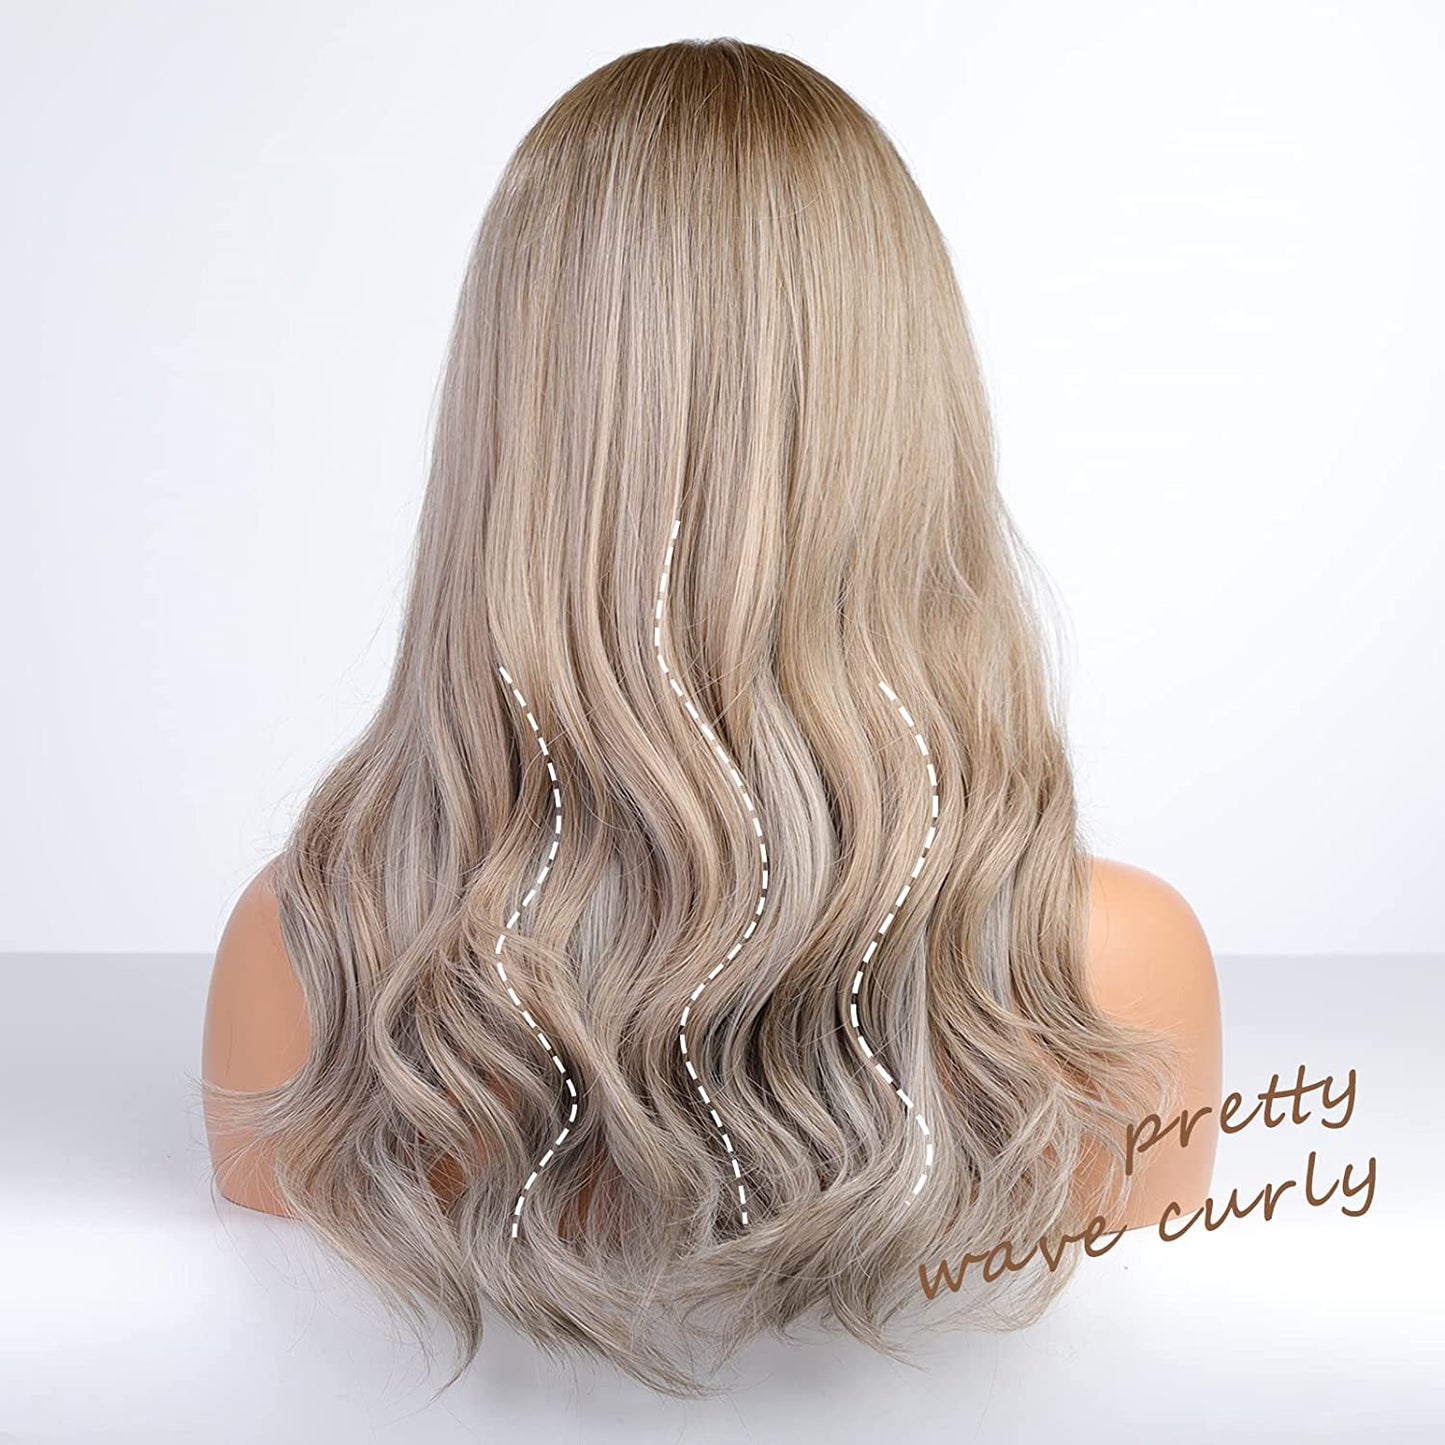 13X5 lace closure wigs Loose Wave Curly Wigs   Ombre Light Ash Blonde  Blonde Mixed Gray Middle Part Curly Wig Natural Synthetic Wig for Daily Use Party